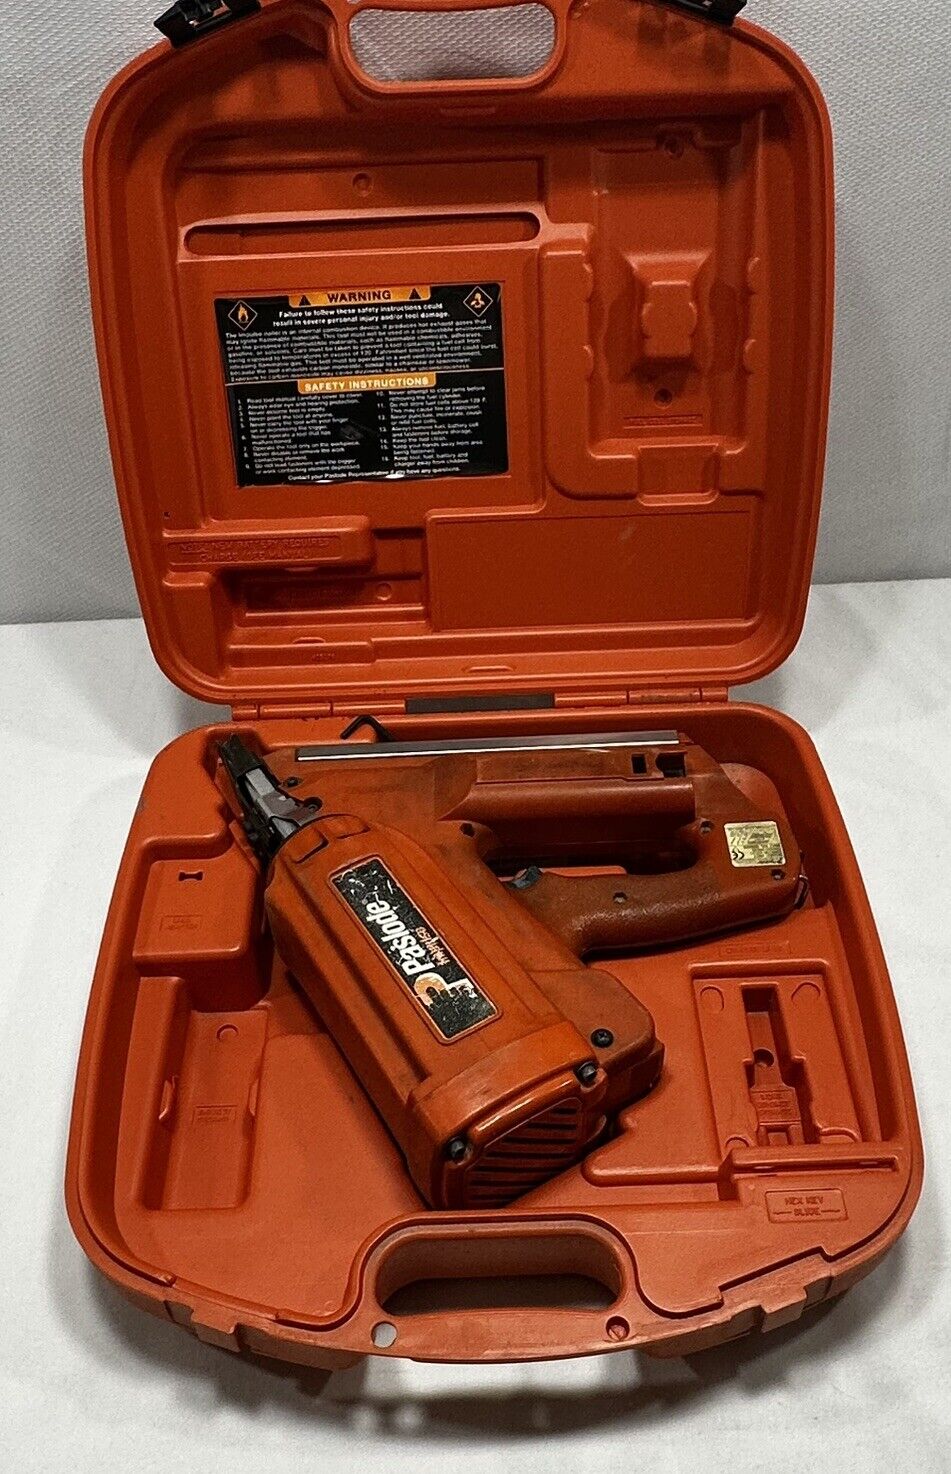 Paslode 30 Degree Impulse Utility Framing Nailer With Case - UNTESTED